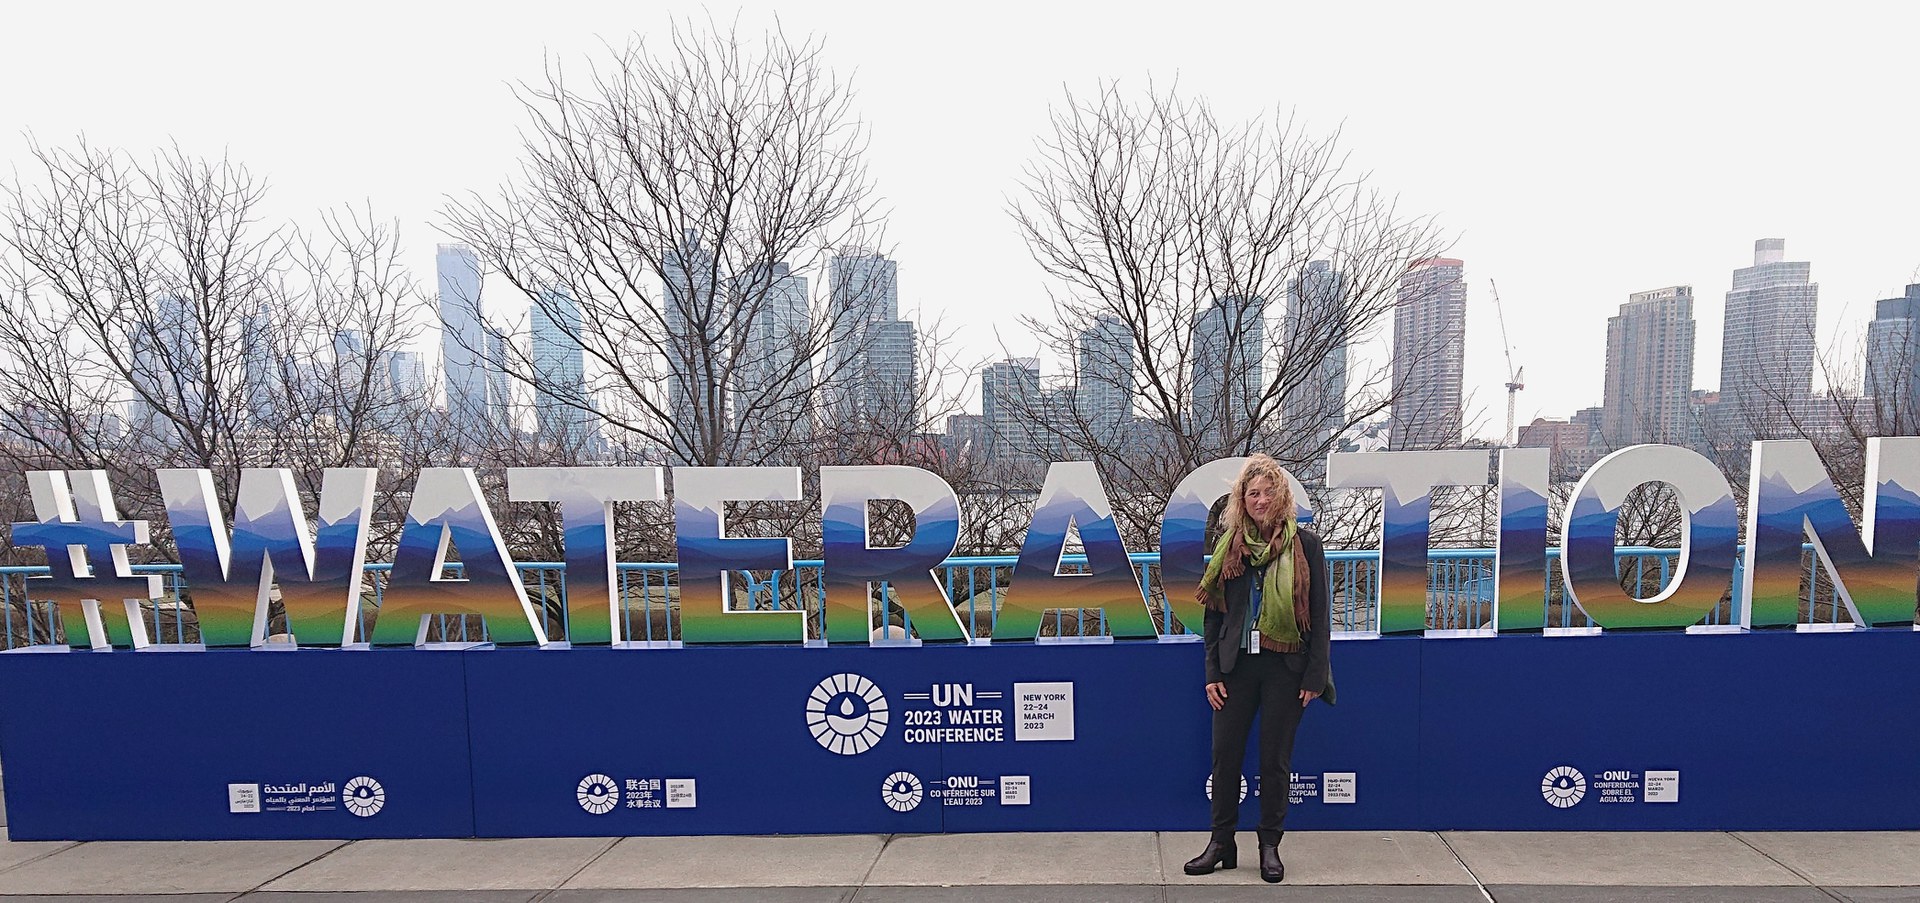 Prof. Mariele Evers in front of the lettering of the UN Water Conference in New York.